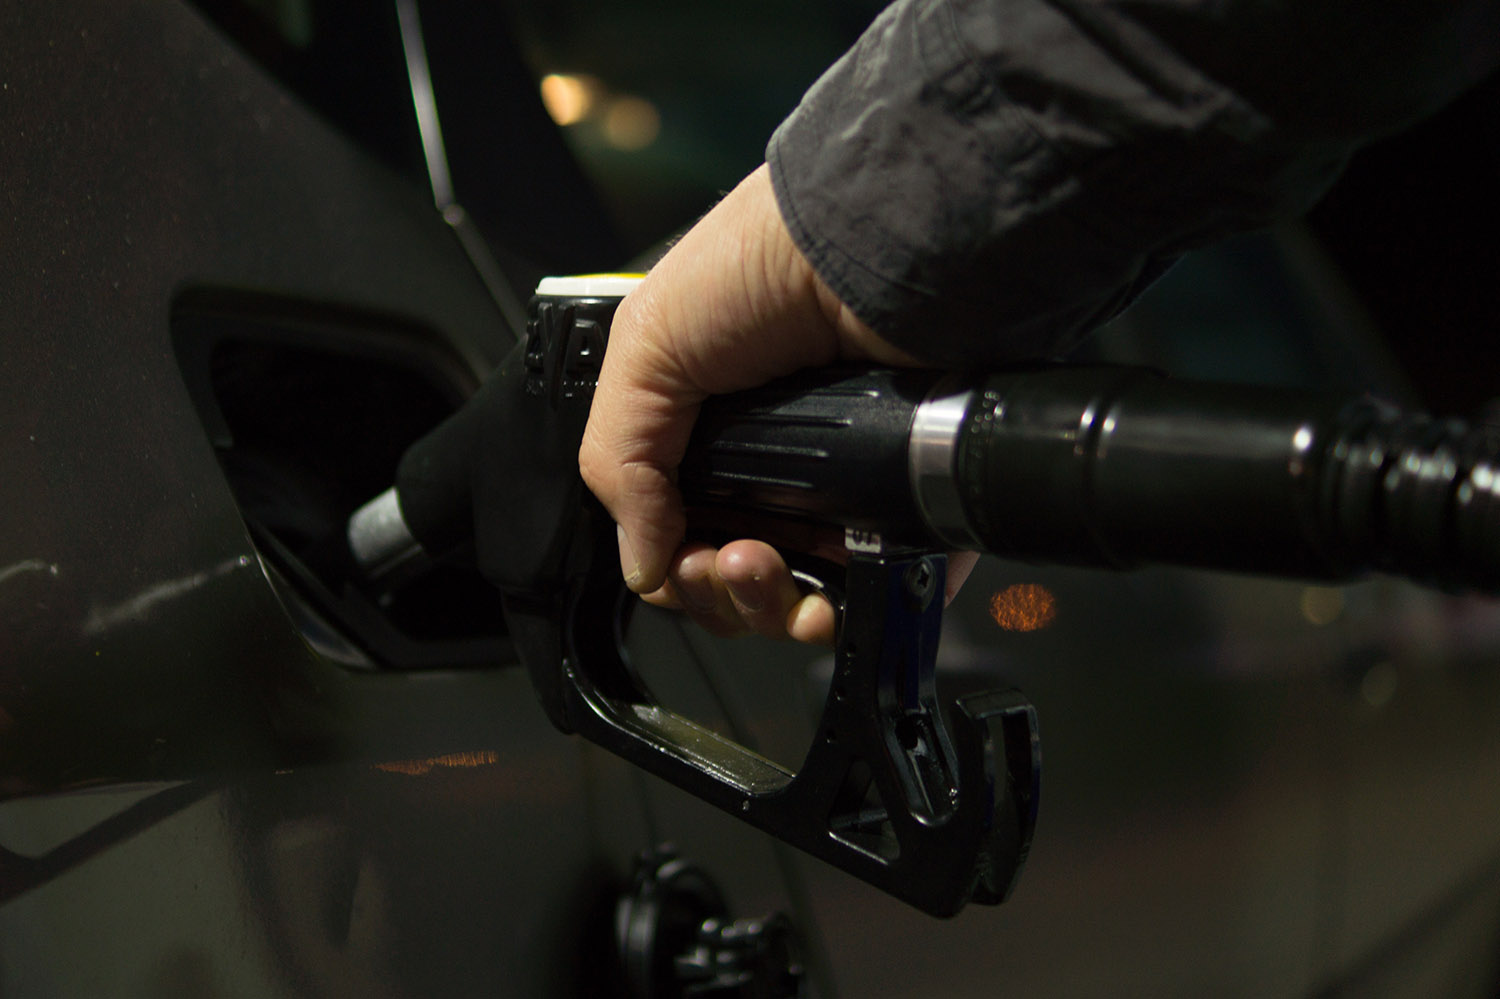 Gas prices are heavy on commuters